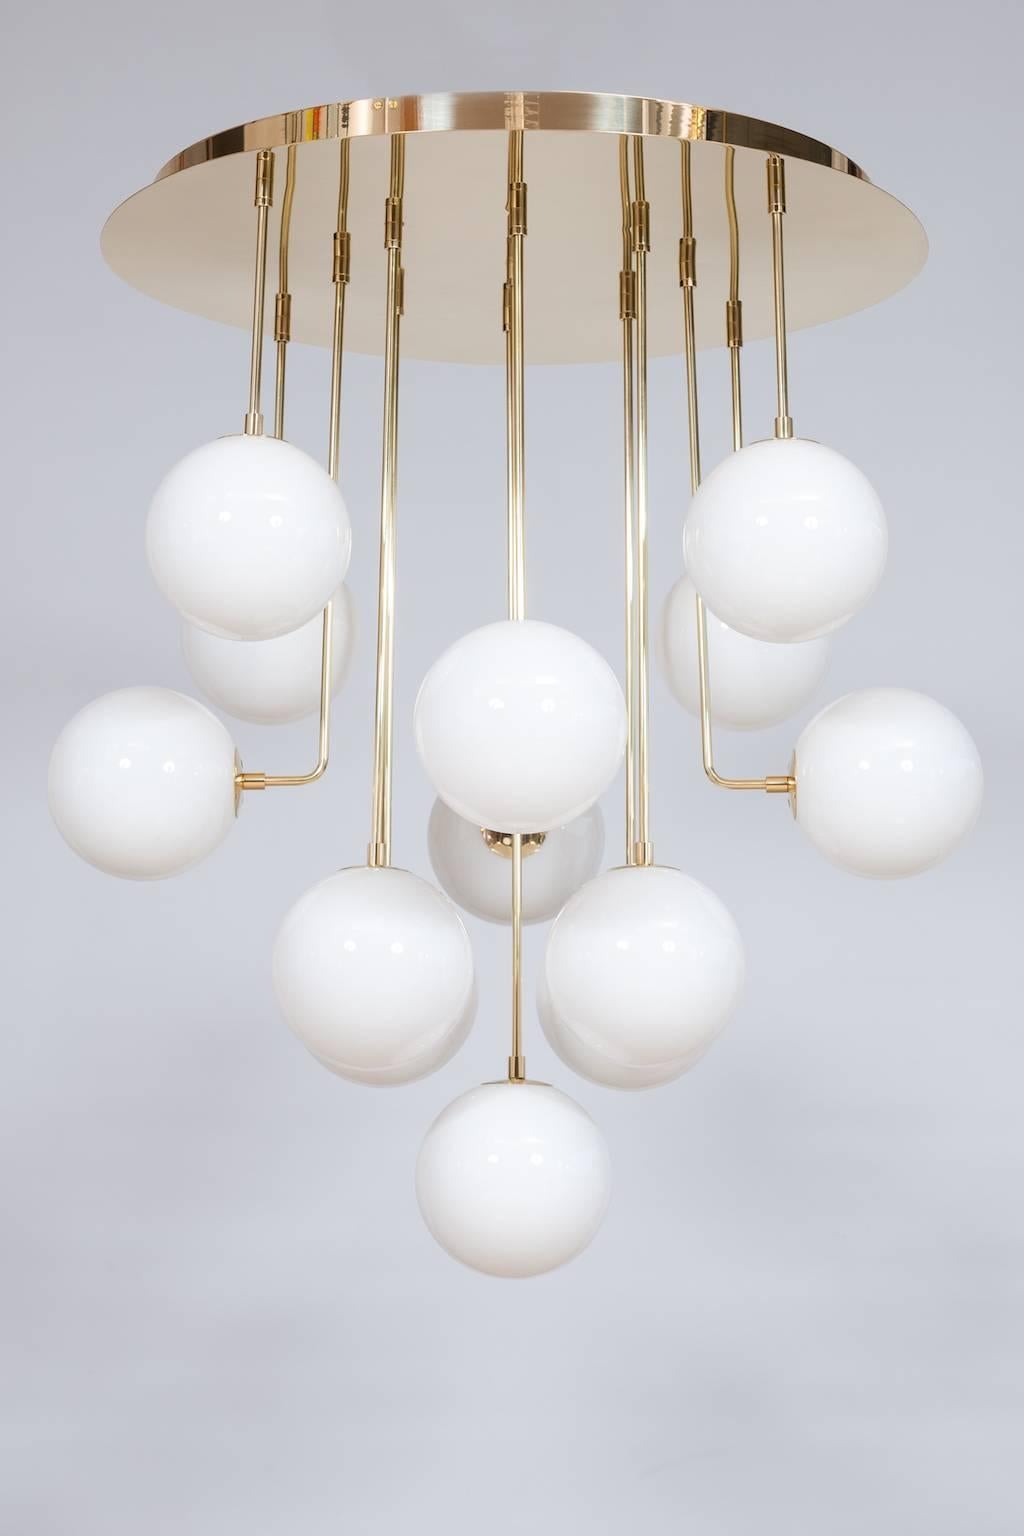 Glimmering Gold Suspension milk-white Spheres Murano Glass Customizable Italy.
This exquisite and customizable suspension fixture, entirely handcrafted in blown Murano glass and brass, embodies the elegance and artistry of contemporary Italian